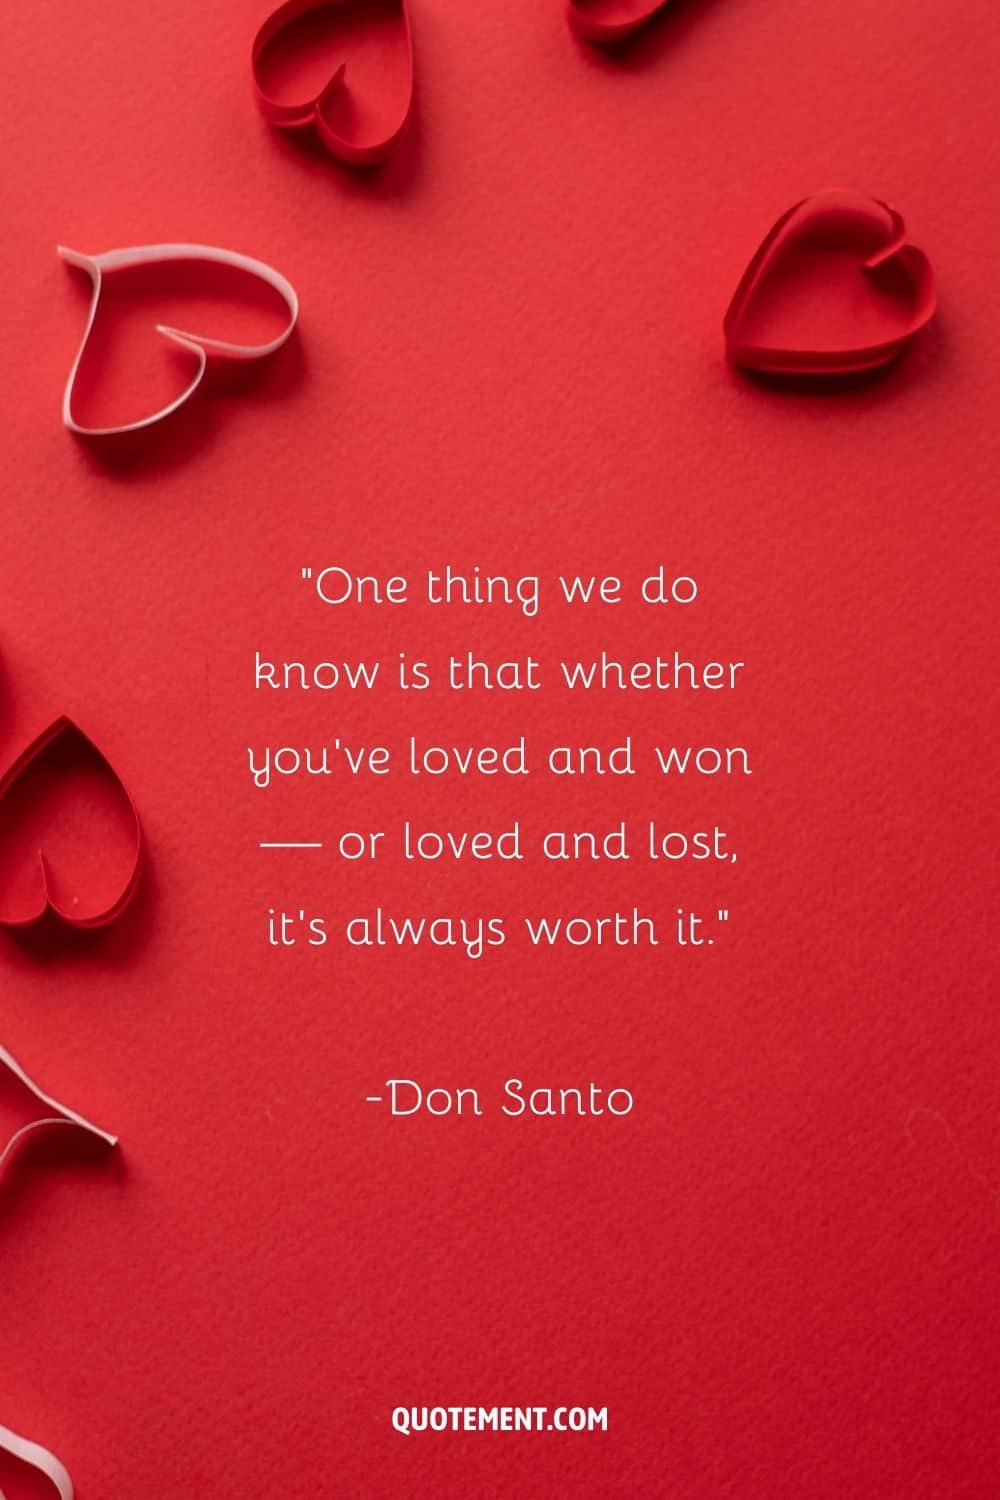 paper hearts arranged on a vibrant red surface representing the greatest lost love quote